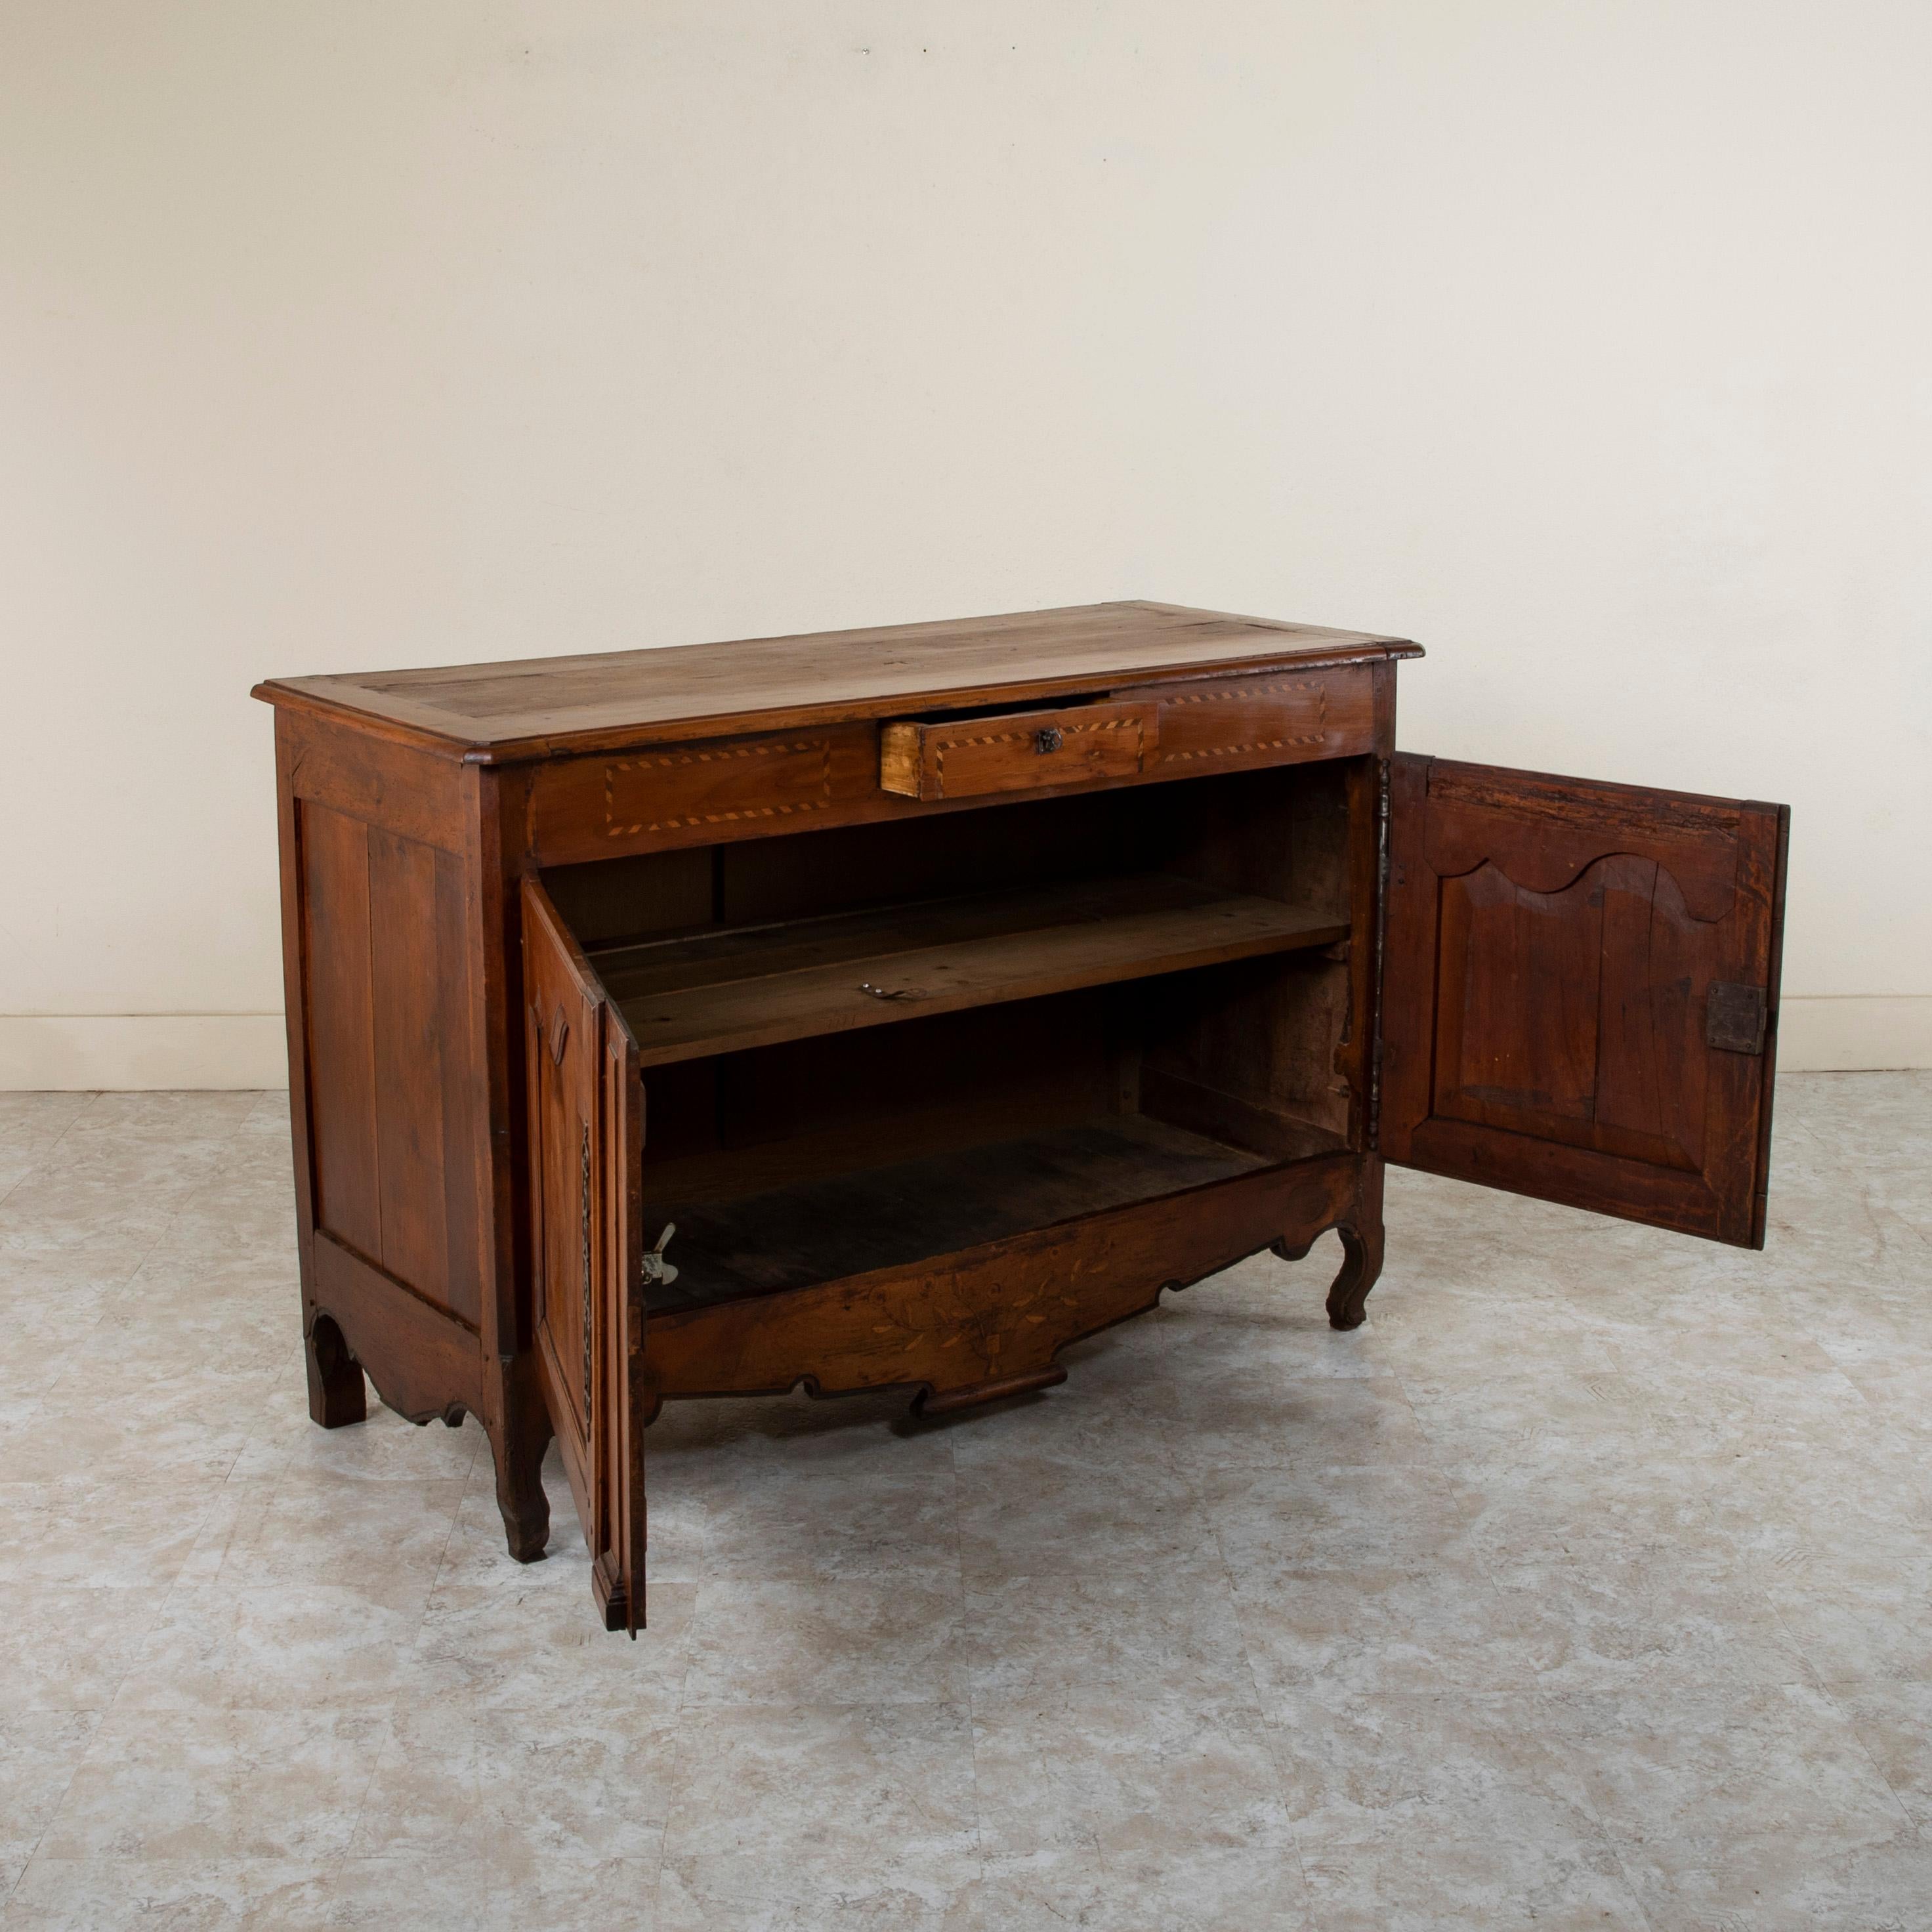 Early 19th Century French Walnut Buffet with Marquetry From the Dordogne Region For Sale 2